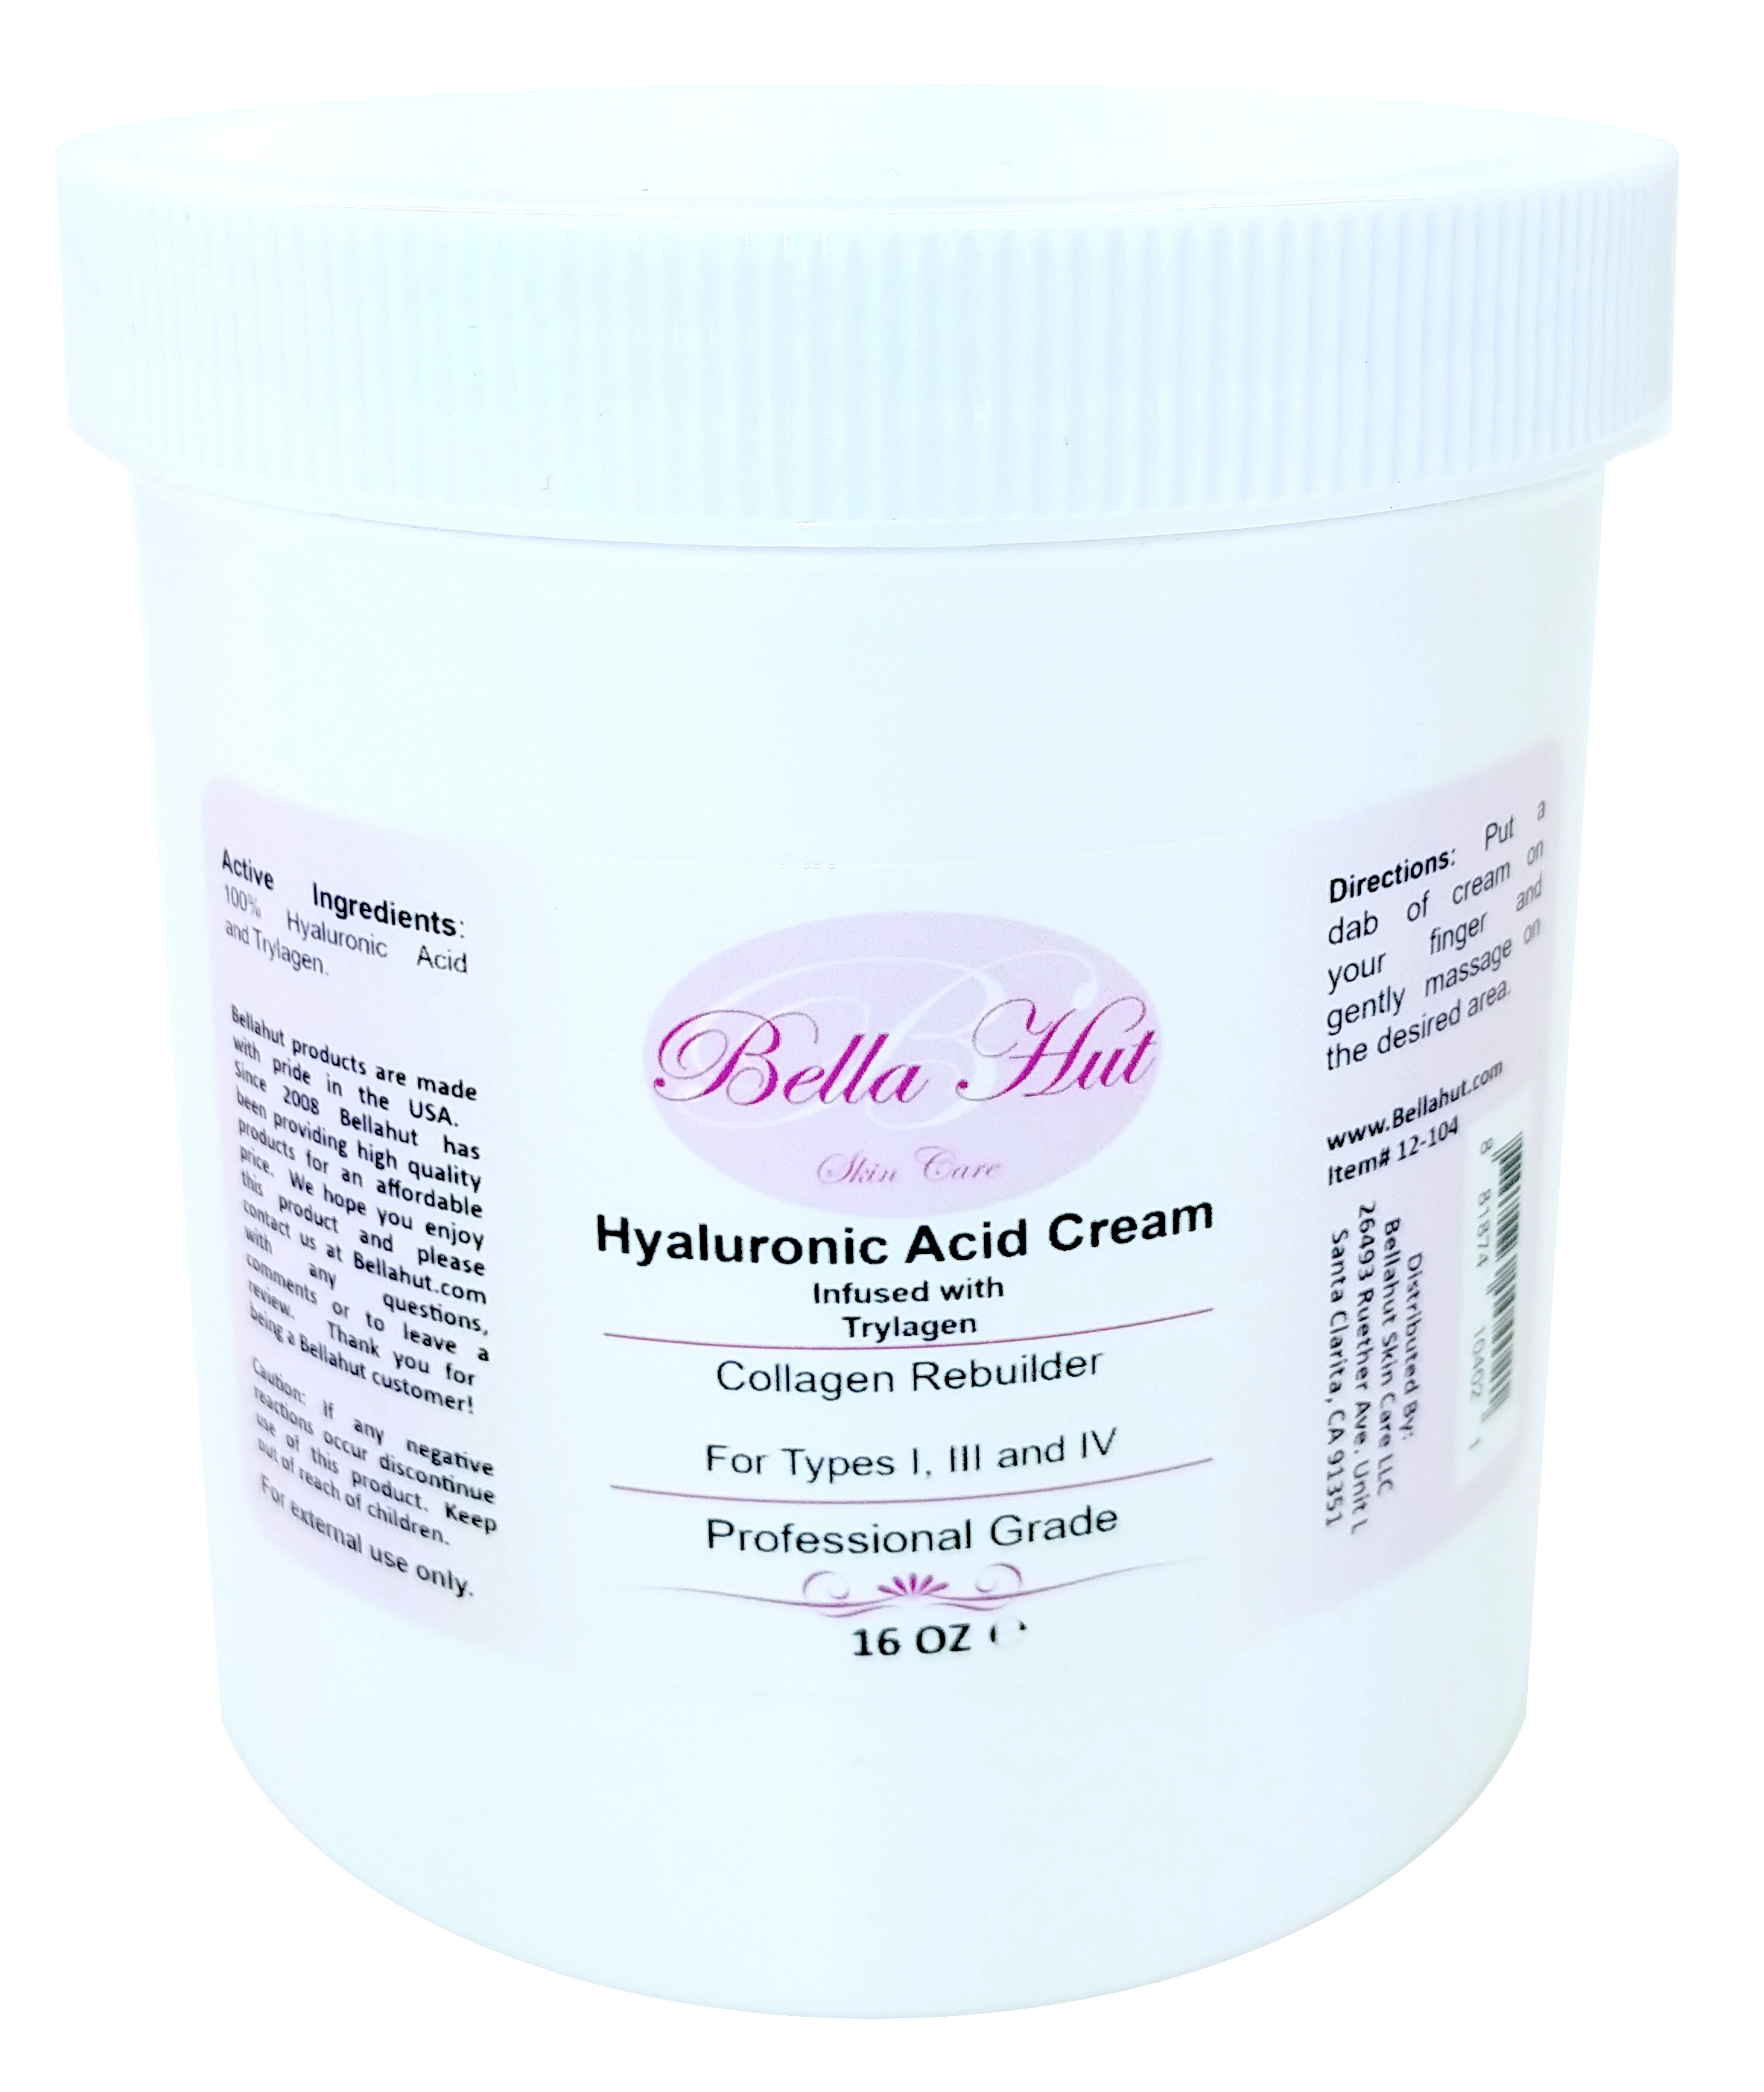 HYALURONIC ACID CREAM with Trylagen